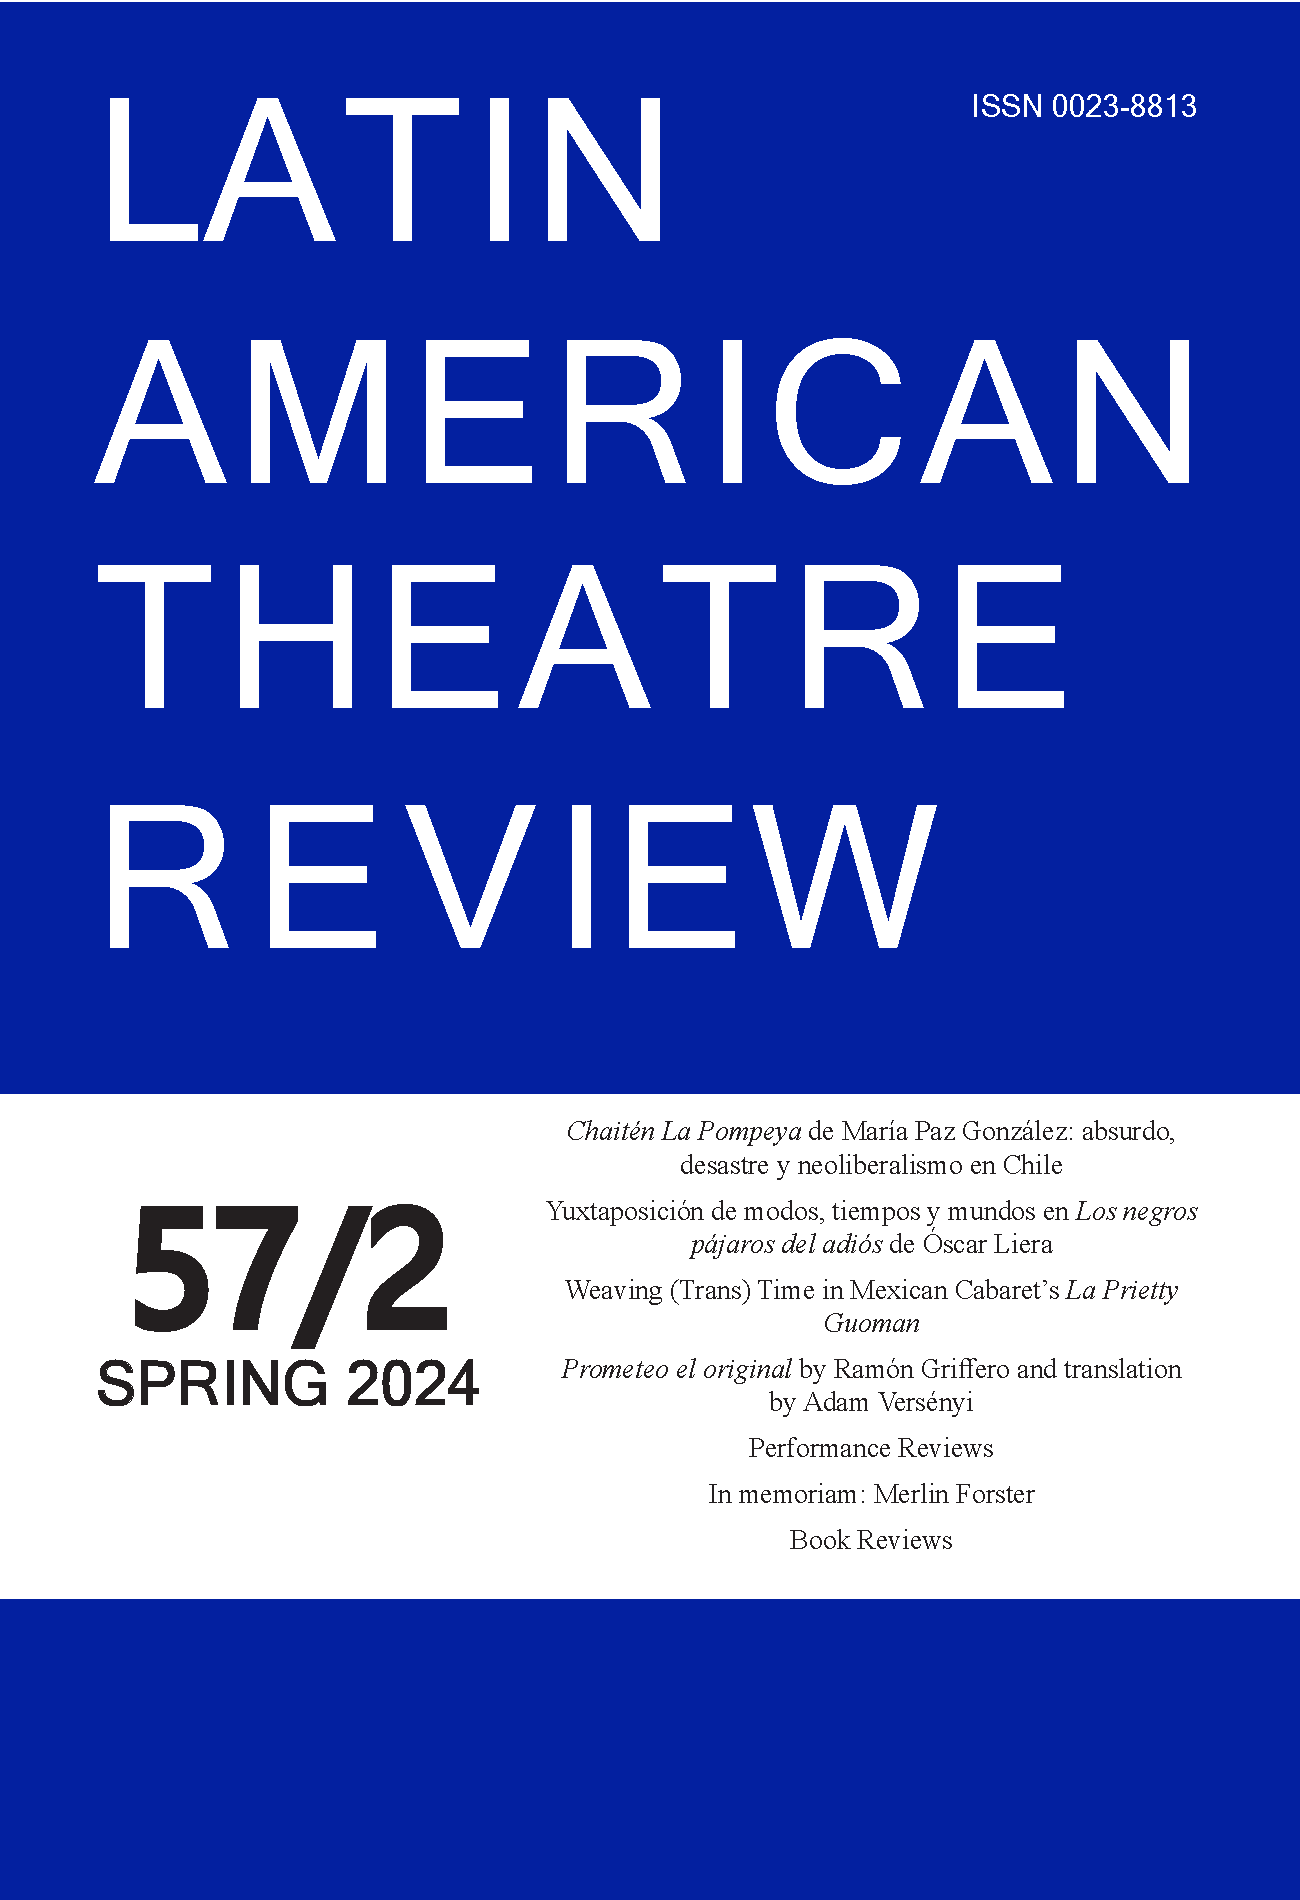 "Latin American Theatre Review" on a bright blue background